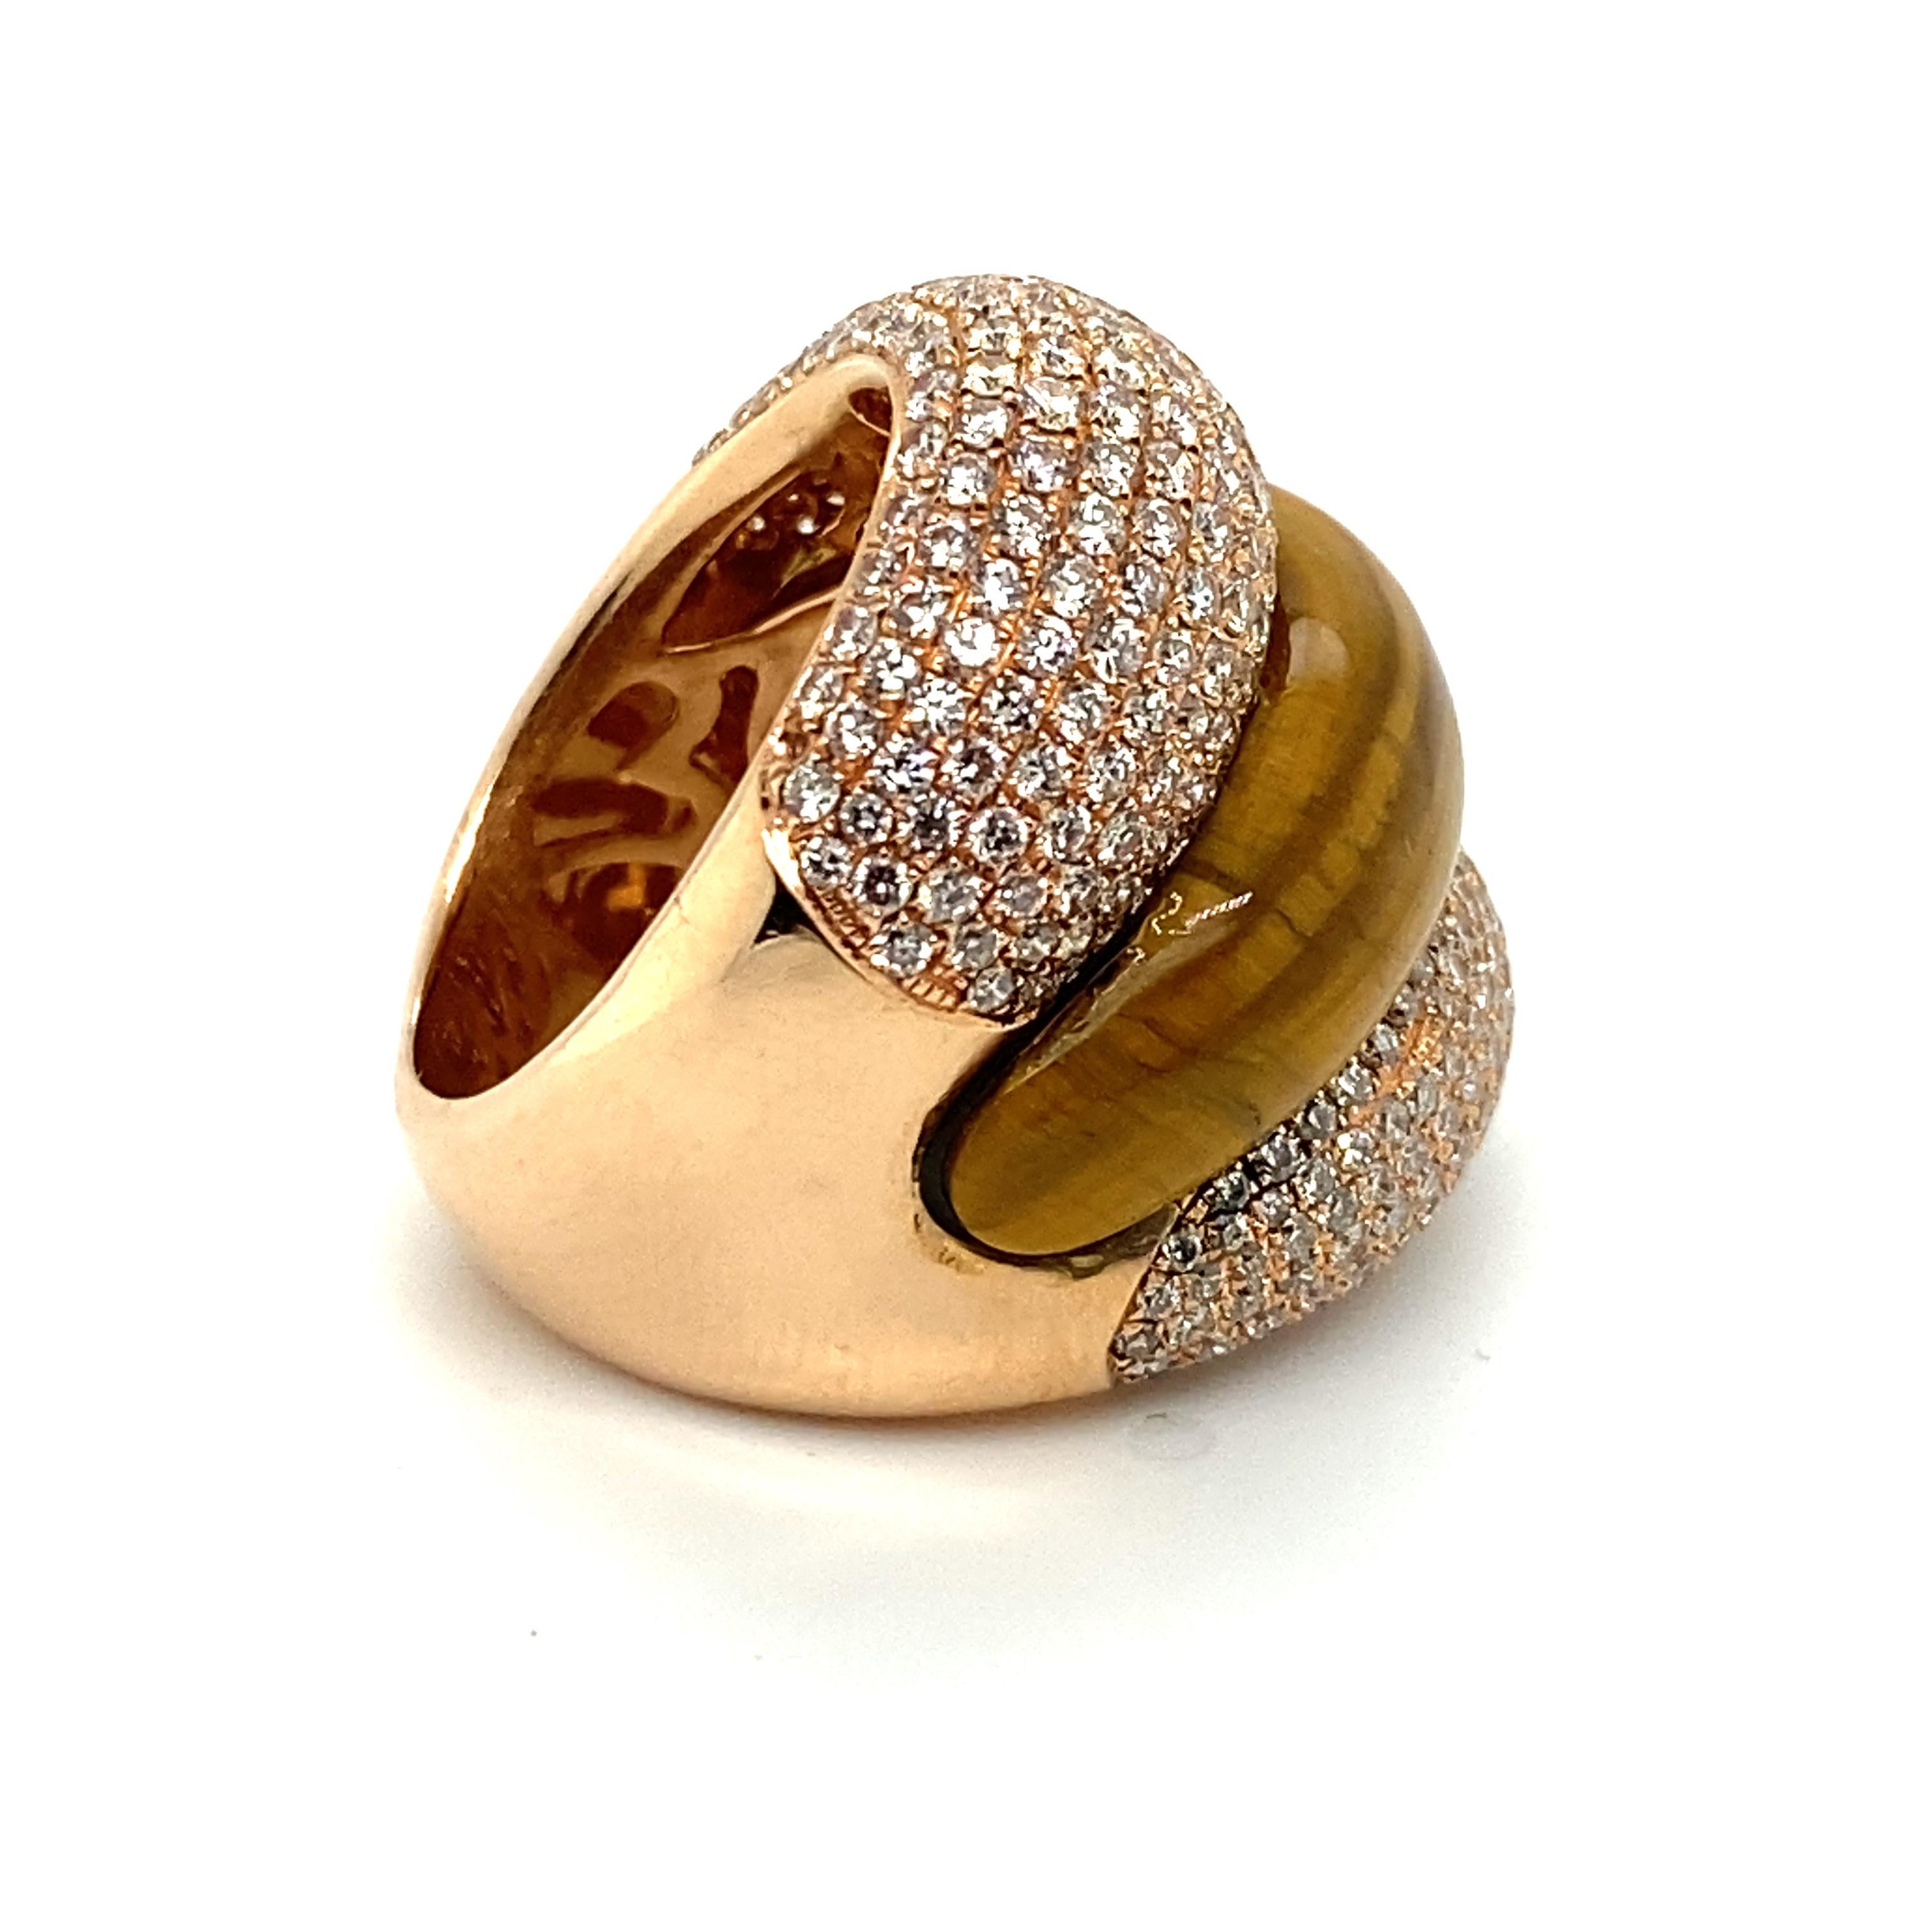 Round Cut Diamond and Carved Tiger's Eye Quartz Polished 18 Karat Gold Cocktail Ring For Sale